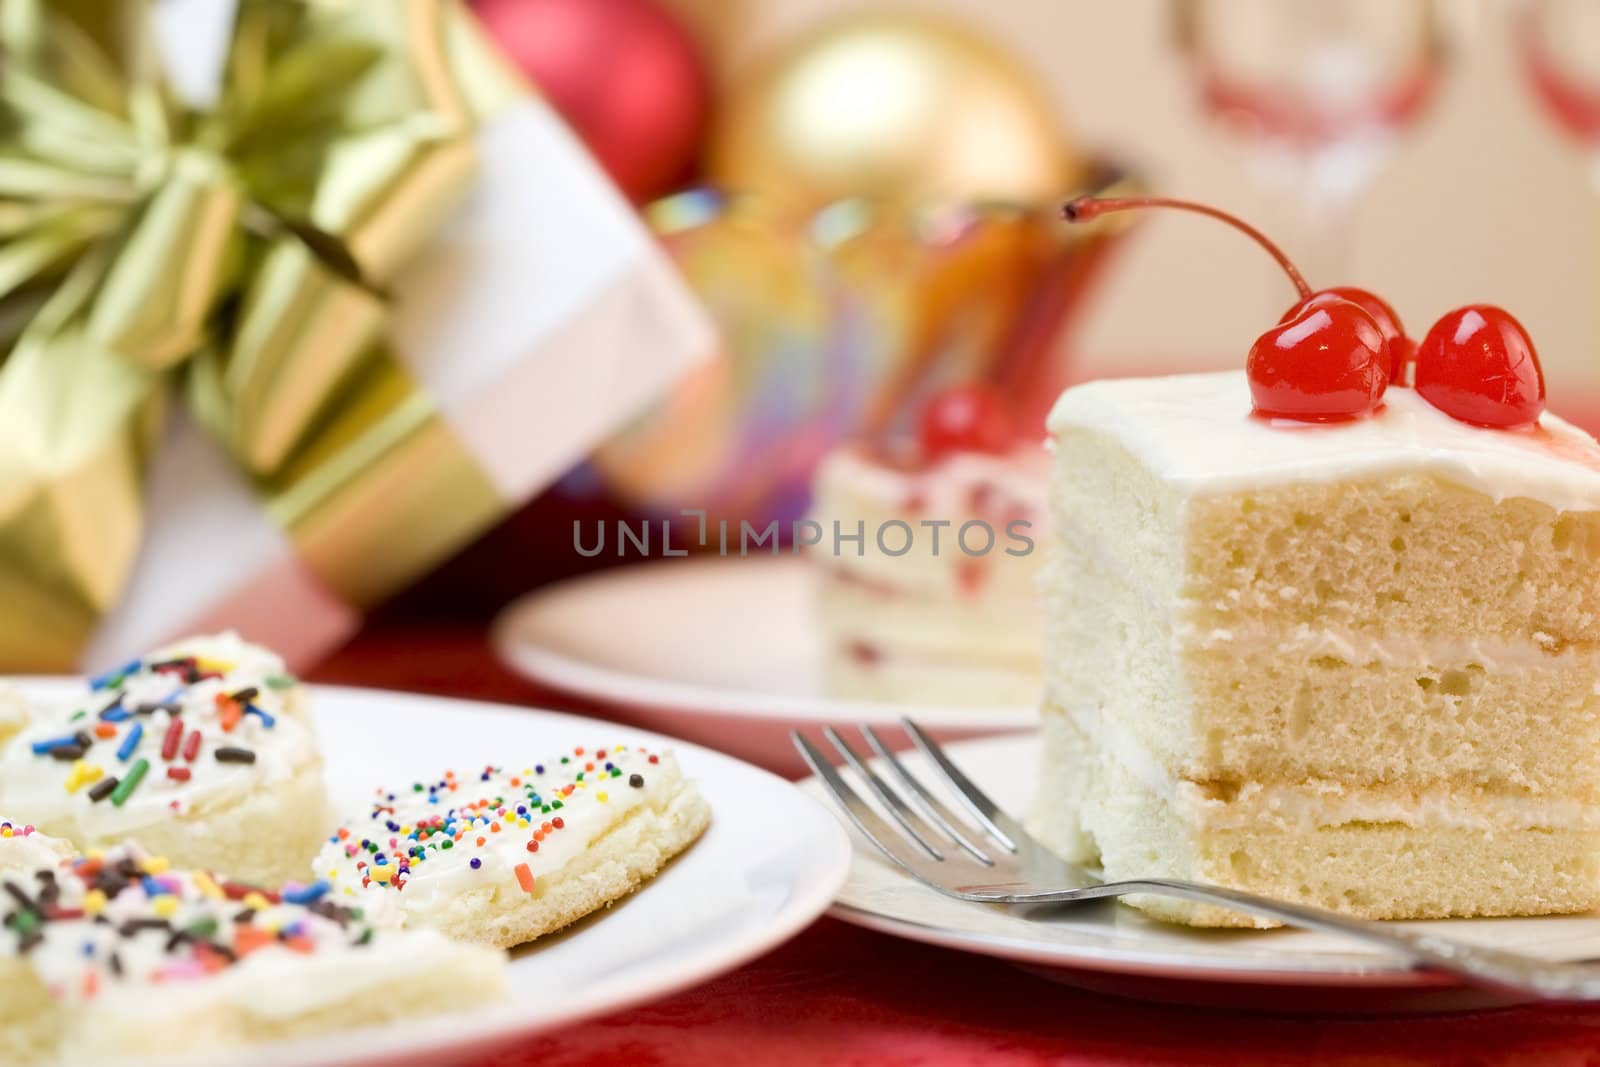 Cake and presents, birthday or Christmas theme by jarenwicklund